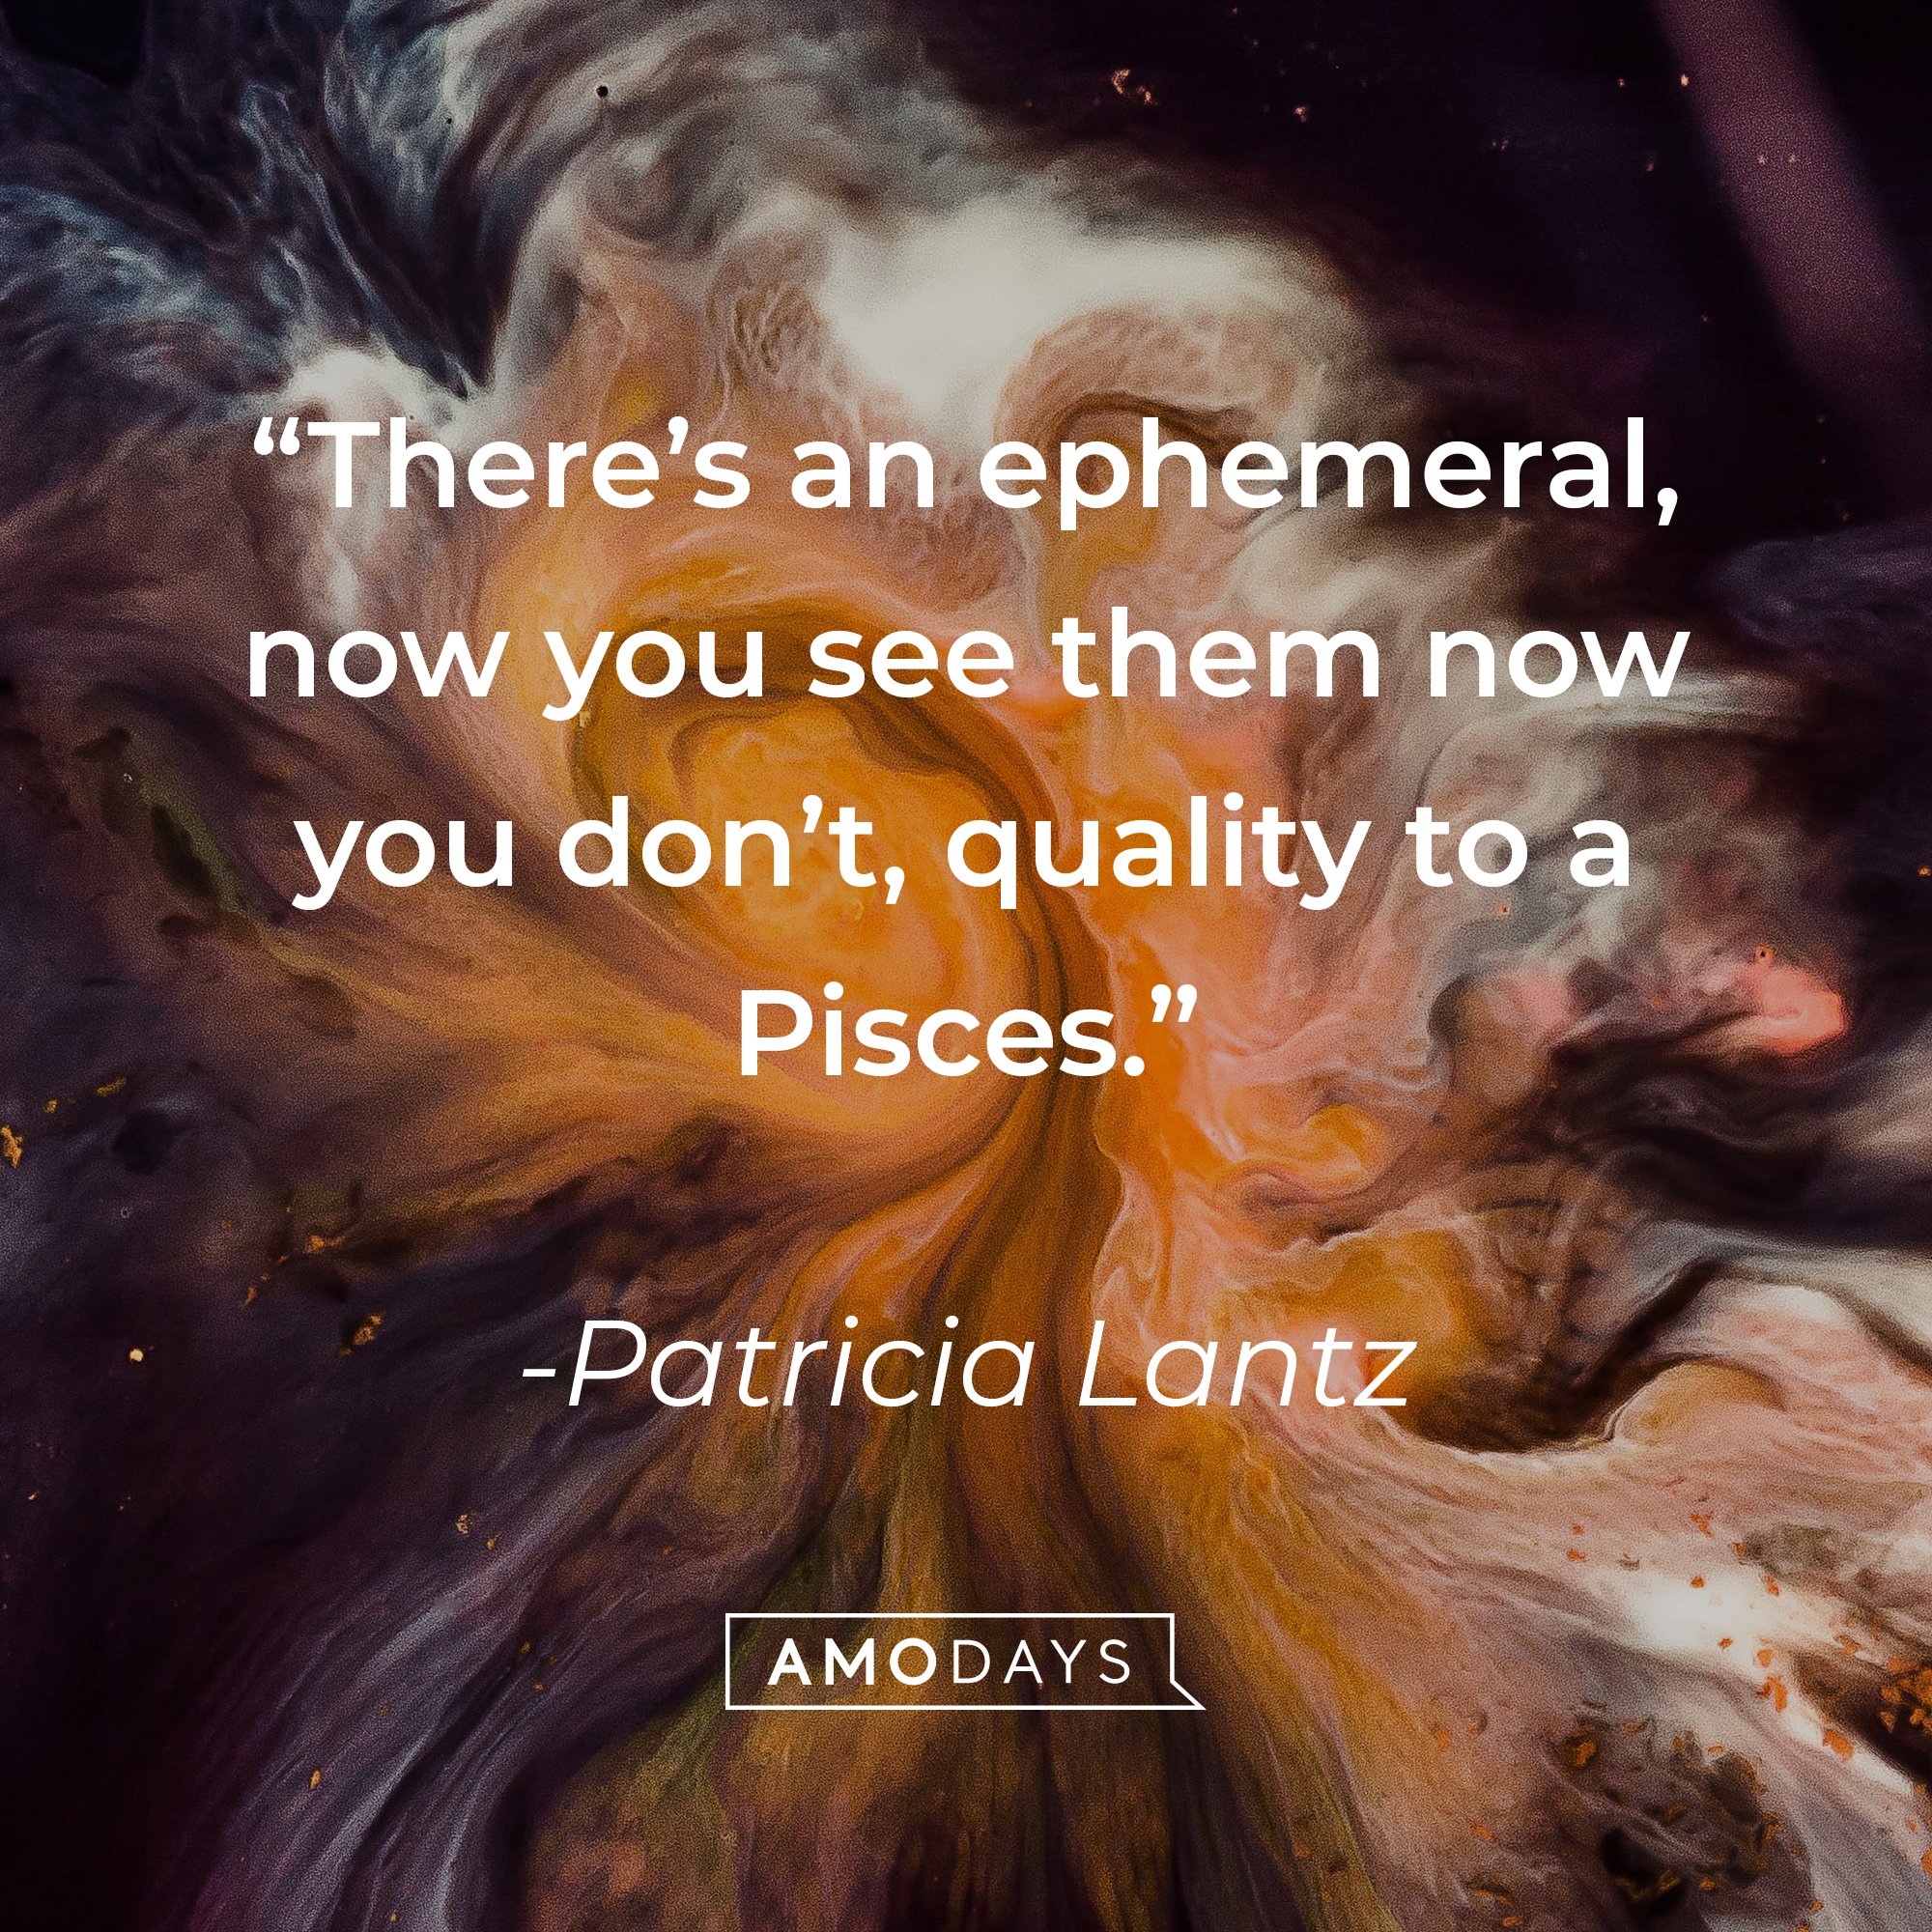 Patricia Lantz's quote: "There's an ephemeral, now you see them now you don't, quality to a Pisces." | Image: AmoDays